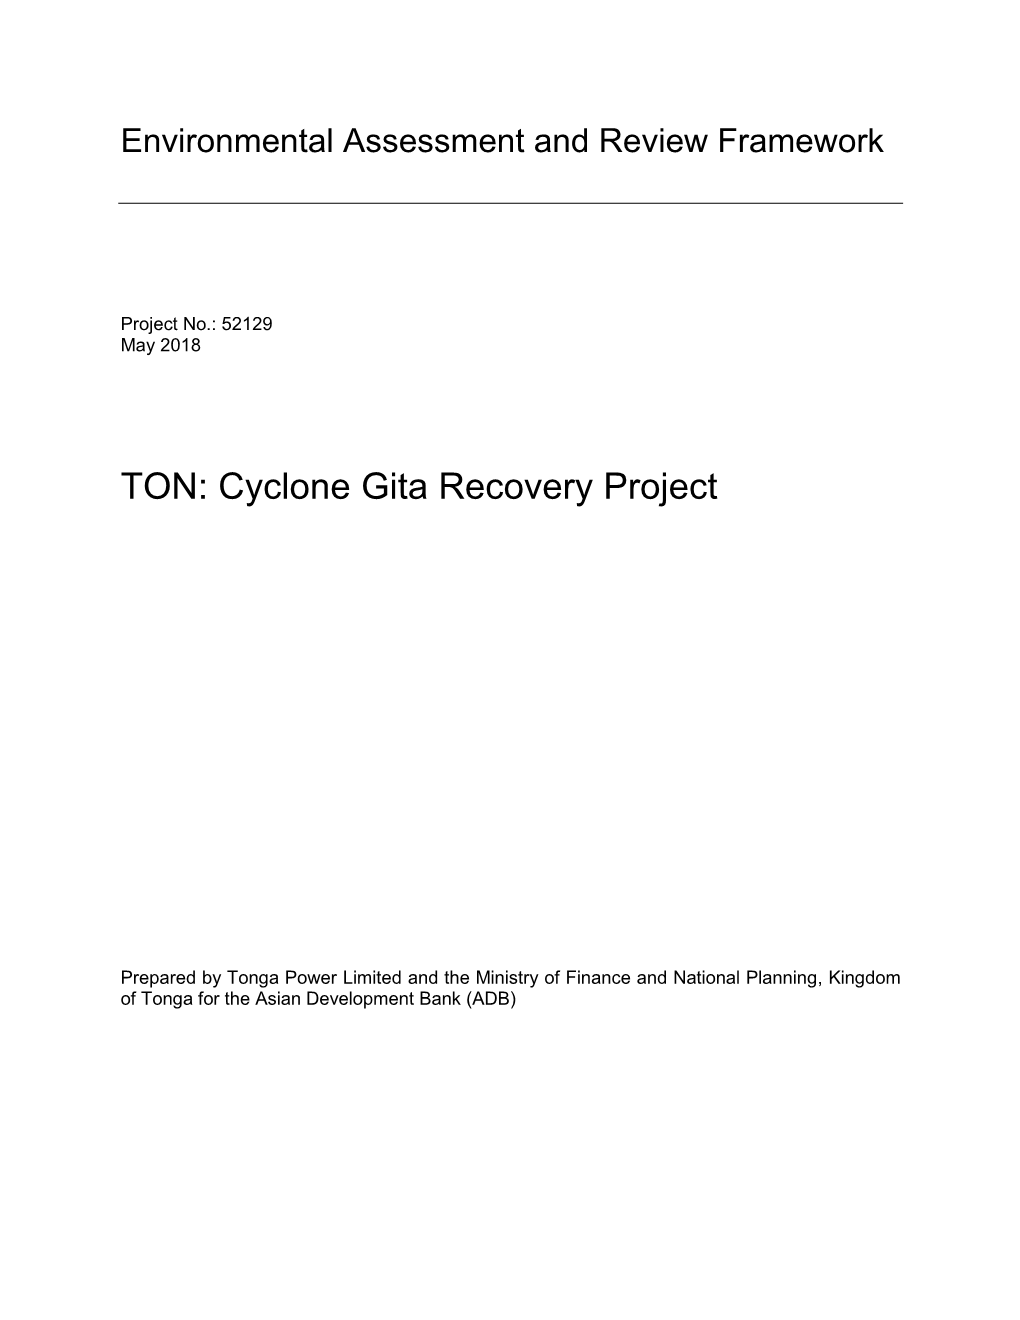 Cyclone Gita Recovery Project: Environmental Assessment And